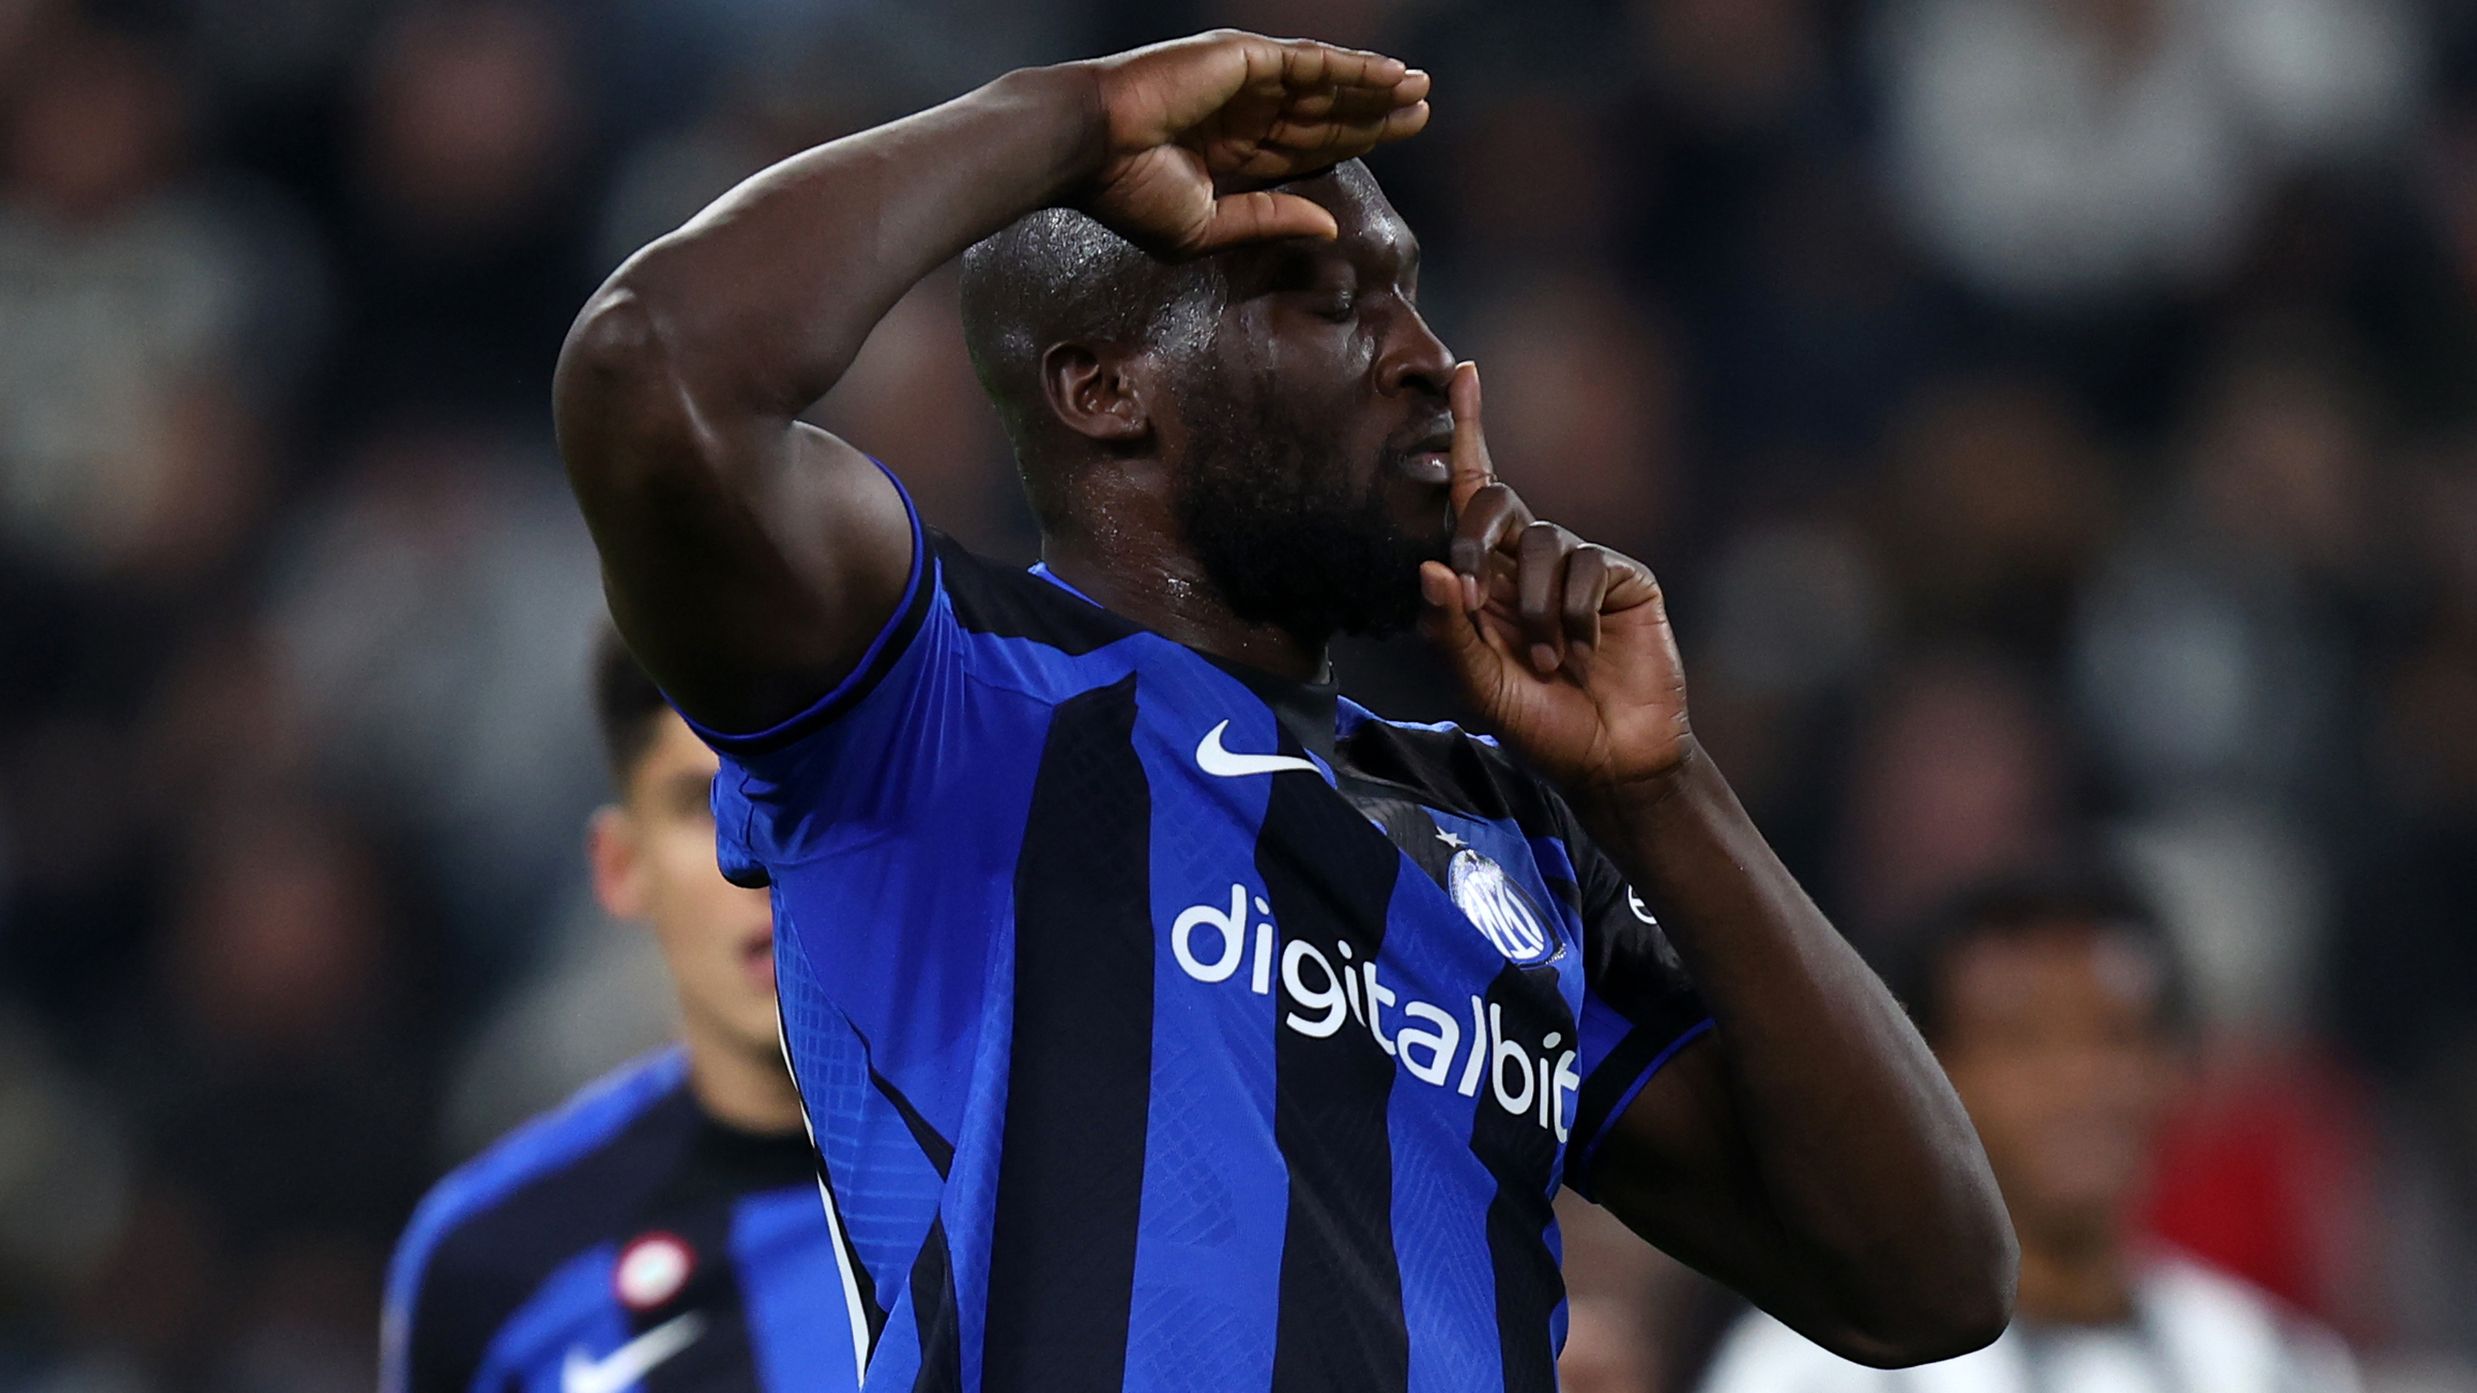 TURIN, ITALY - APRIL 04: Romelu Lukaku of FC Internazionale celebrates after scoring his team&#x27;s first goal during the Coppa Italia Semi Final match between Juventus FC and FC Internazionale at Allianz Stadium on April 4, 2023 in Turin, Italy. (Photo by Sportinfoto/DeFodi Images via Getty Images)